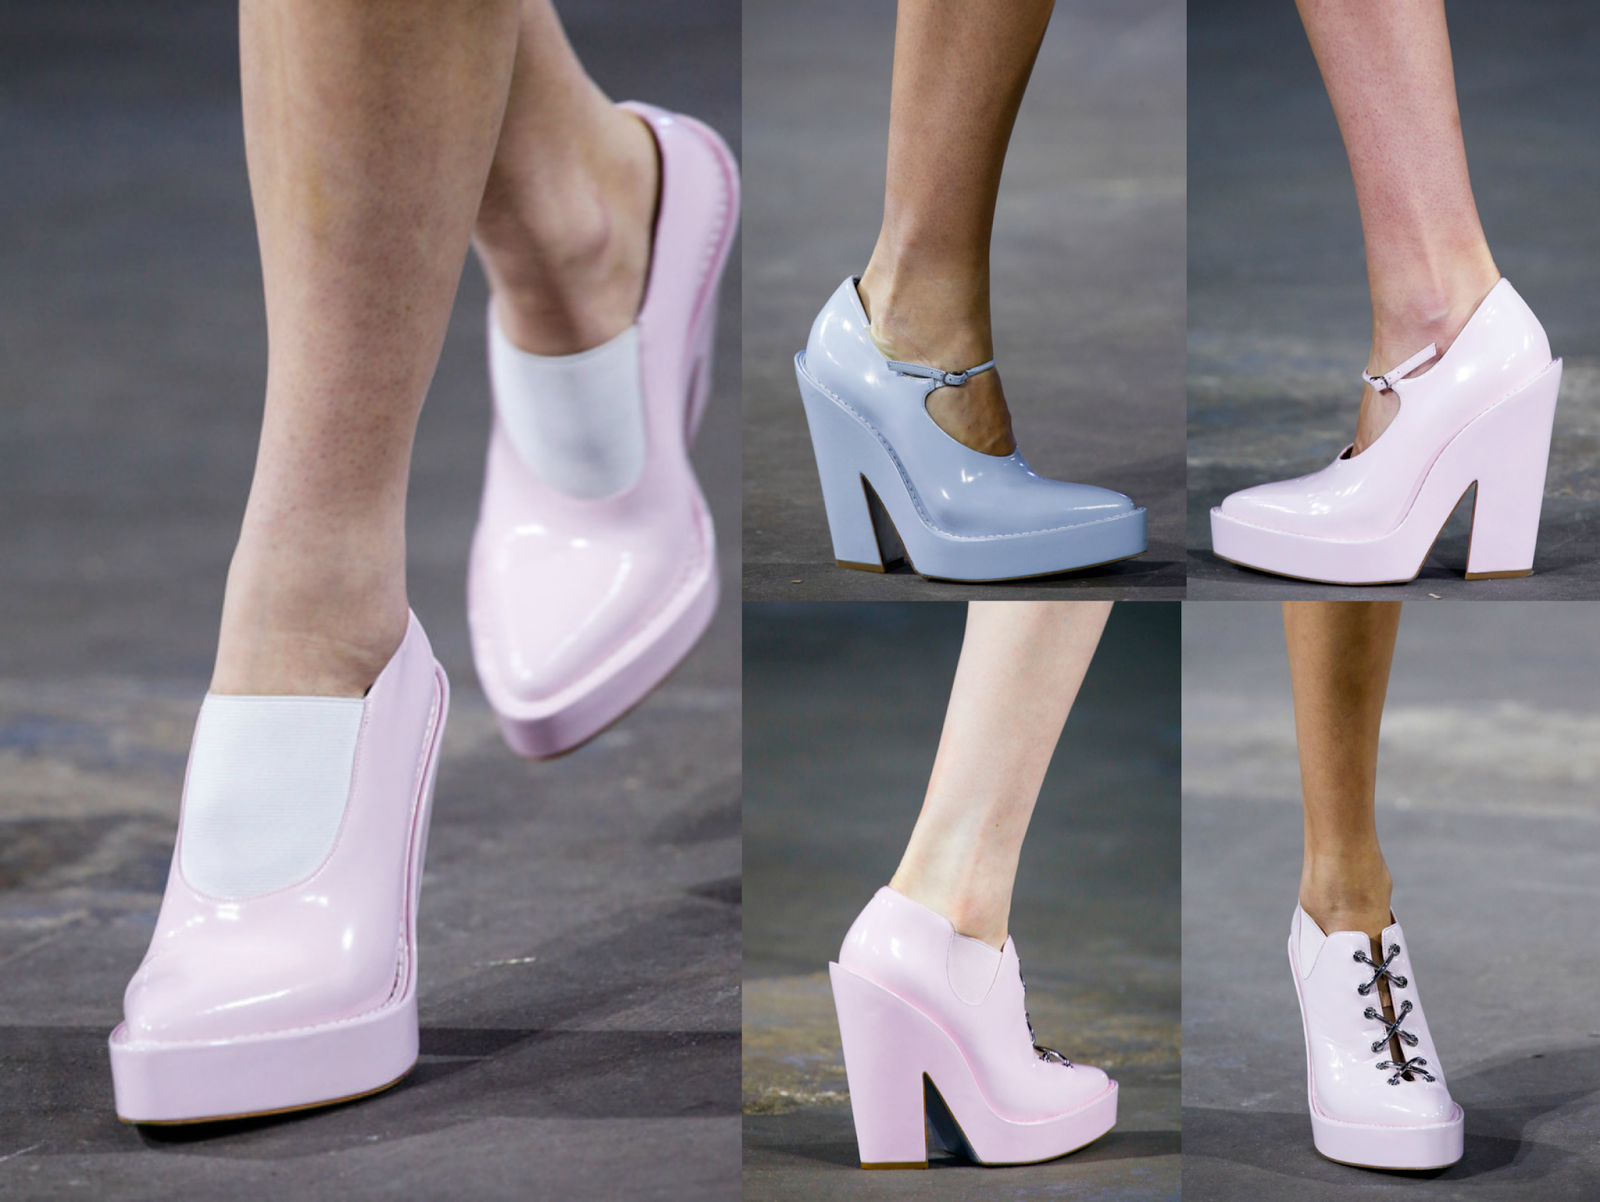 confessions of a style cookie: alexander wang spring 2014.